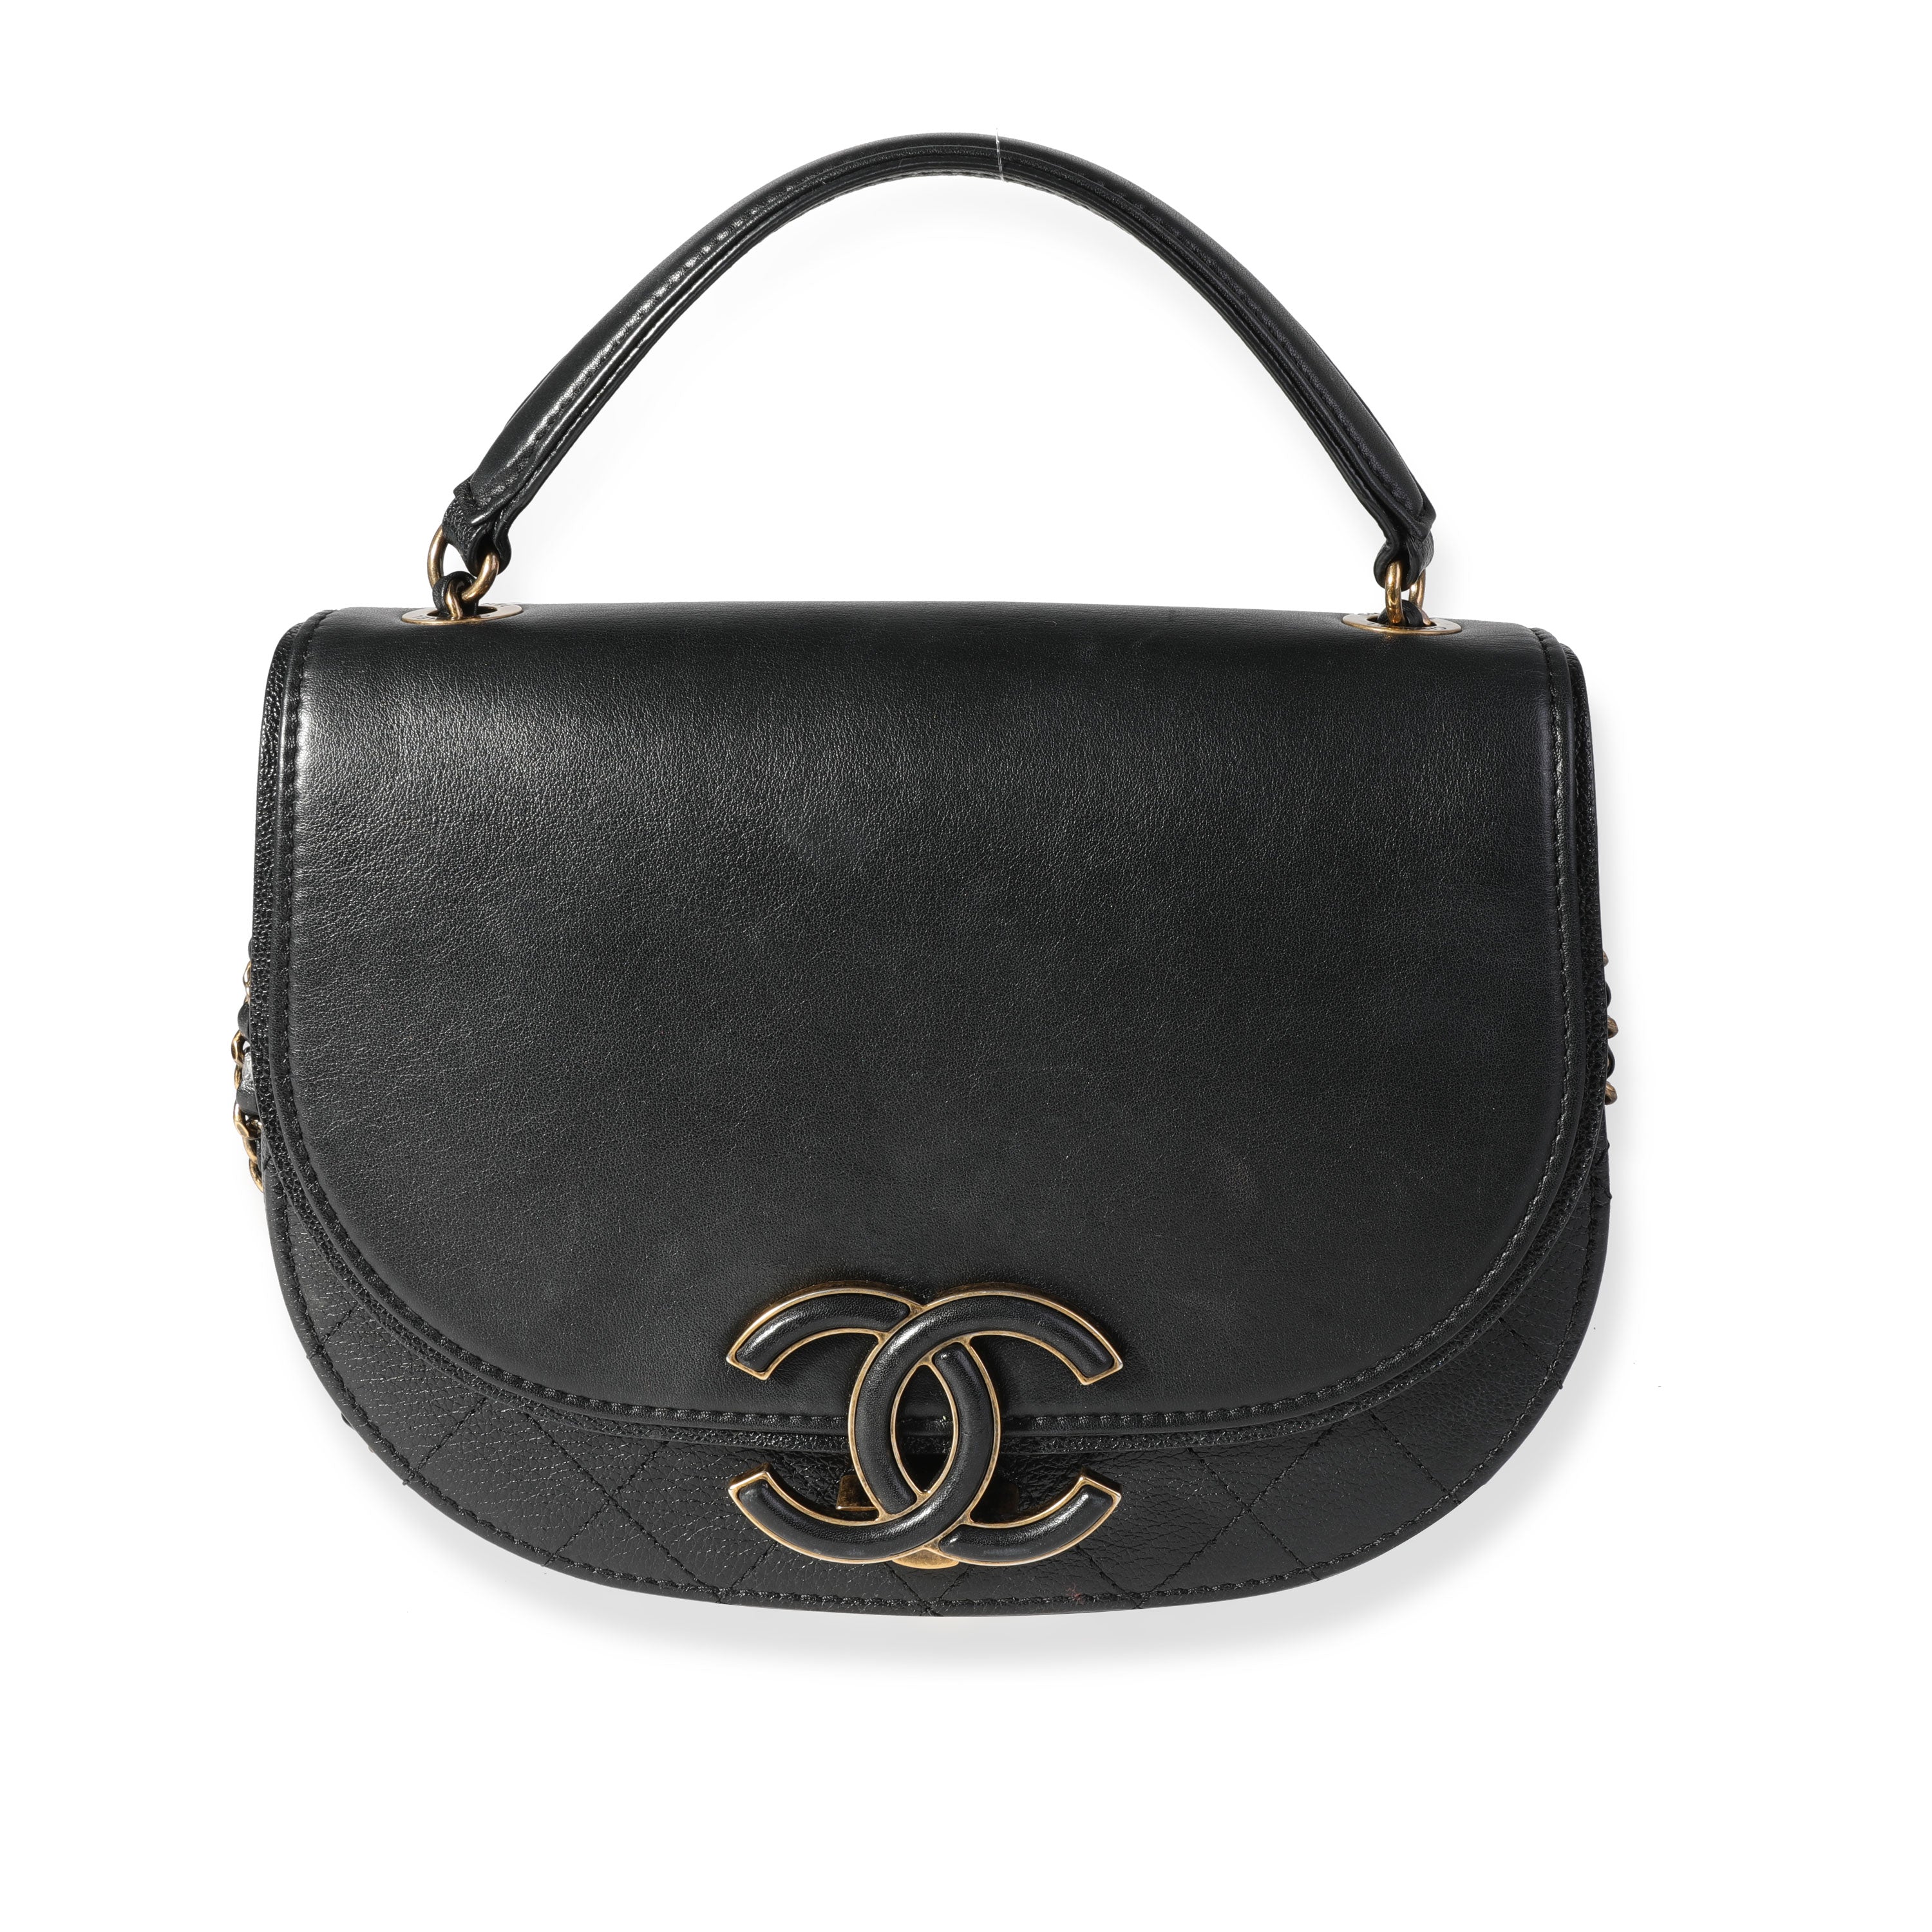 Chanel Black Quilted Calfskin Coco Curve Flap Bag, myGemma